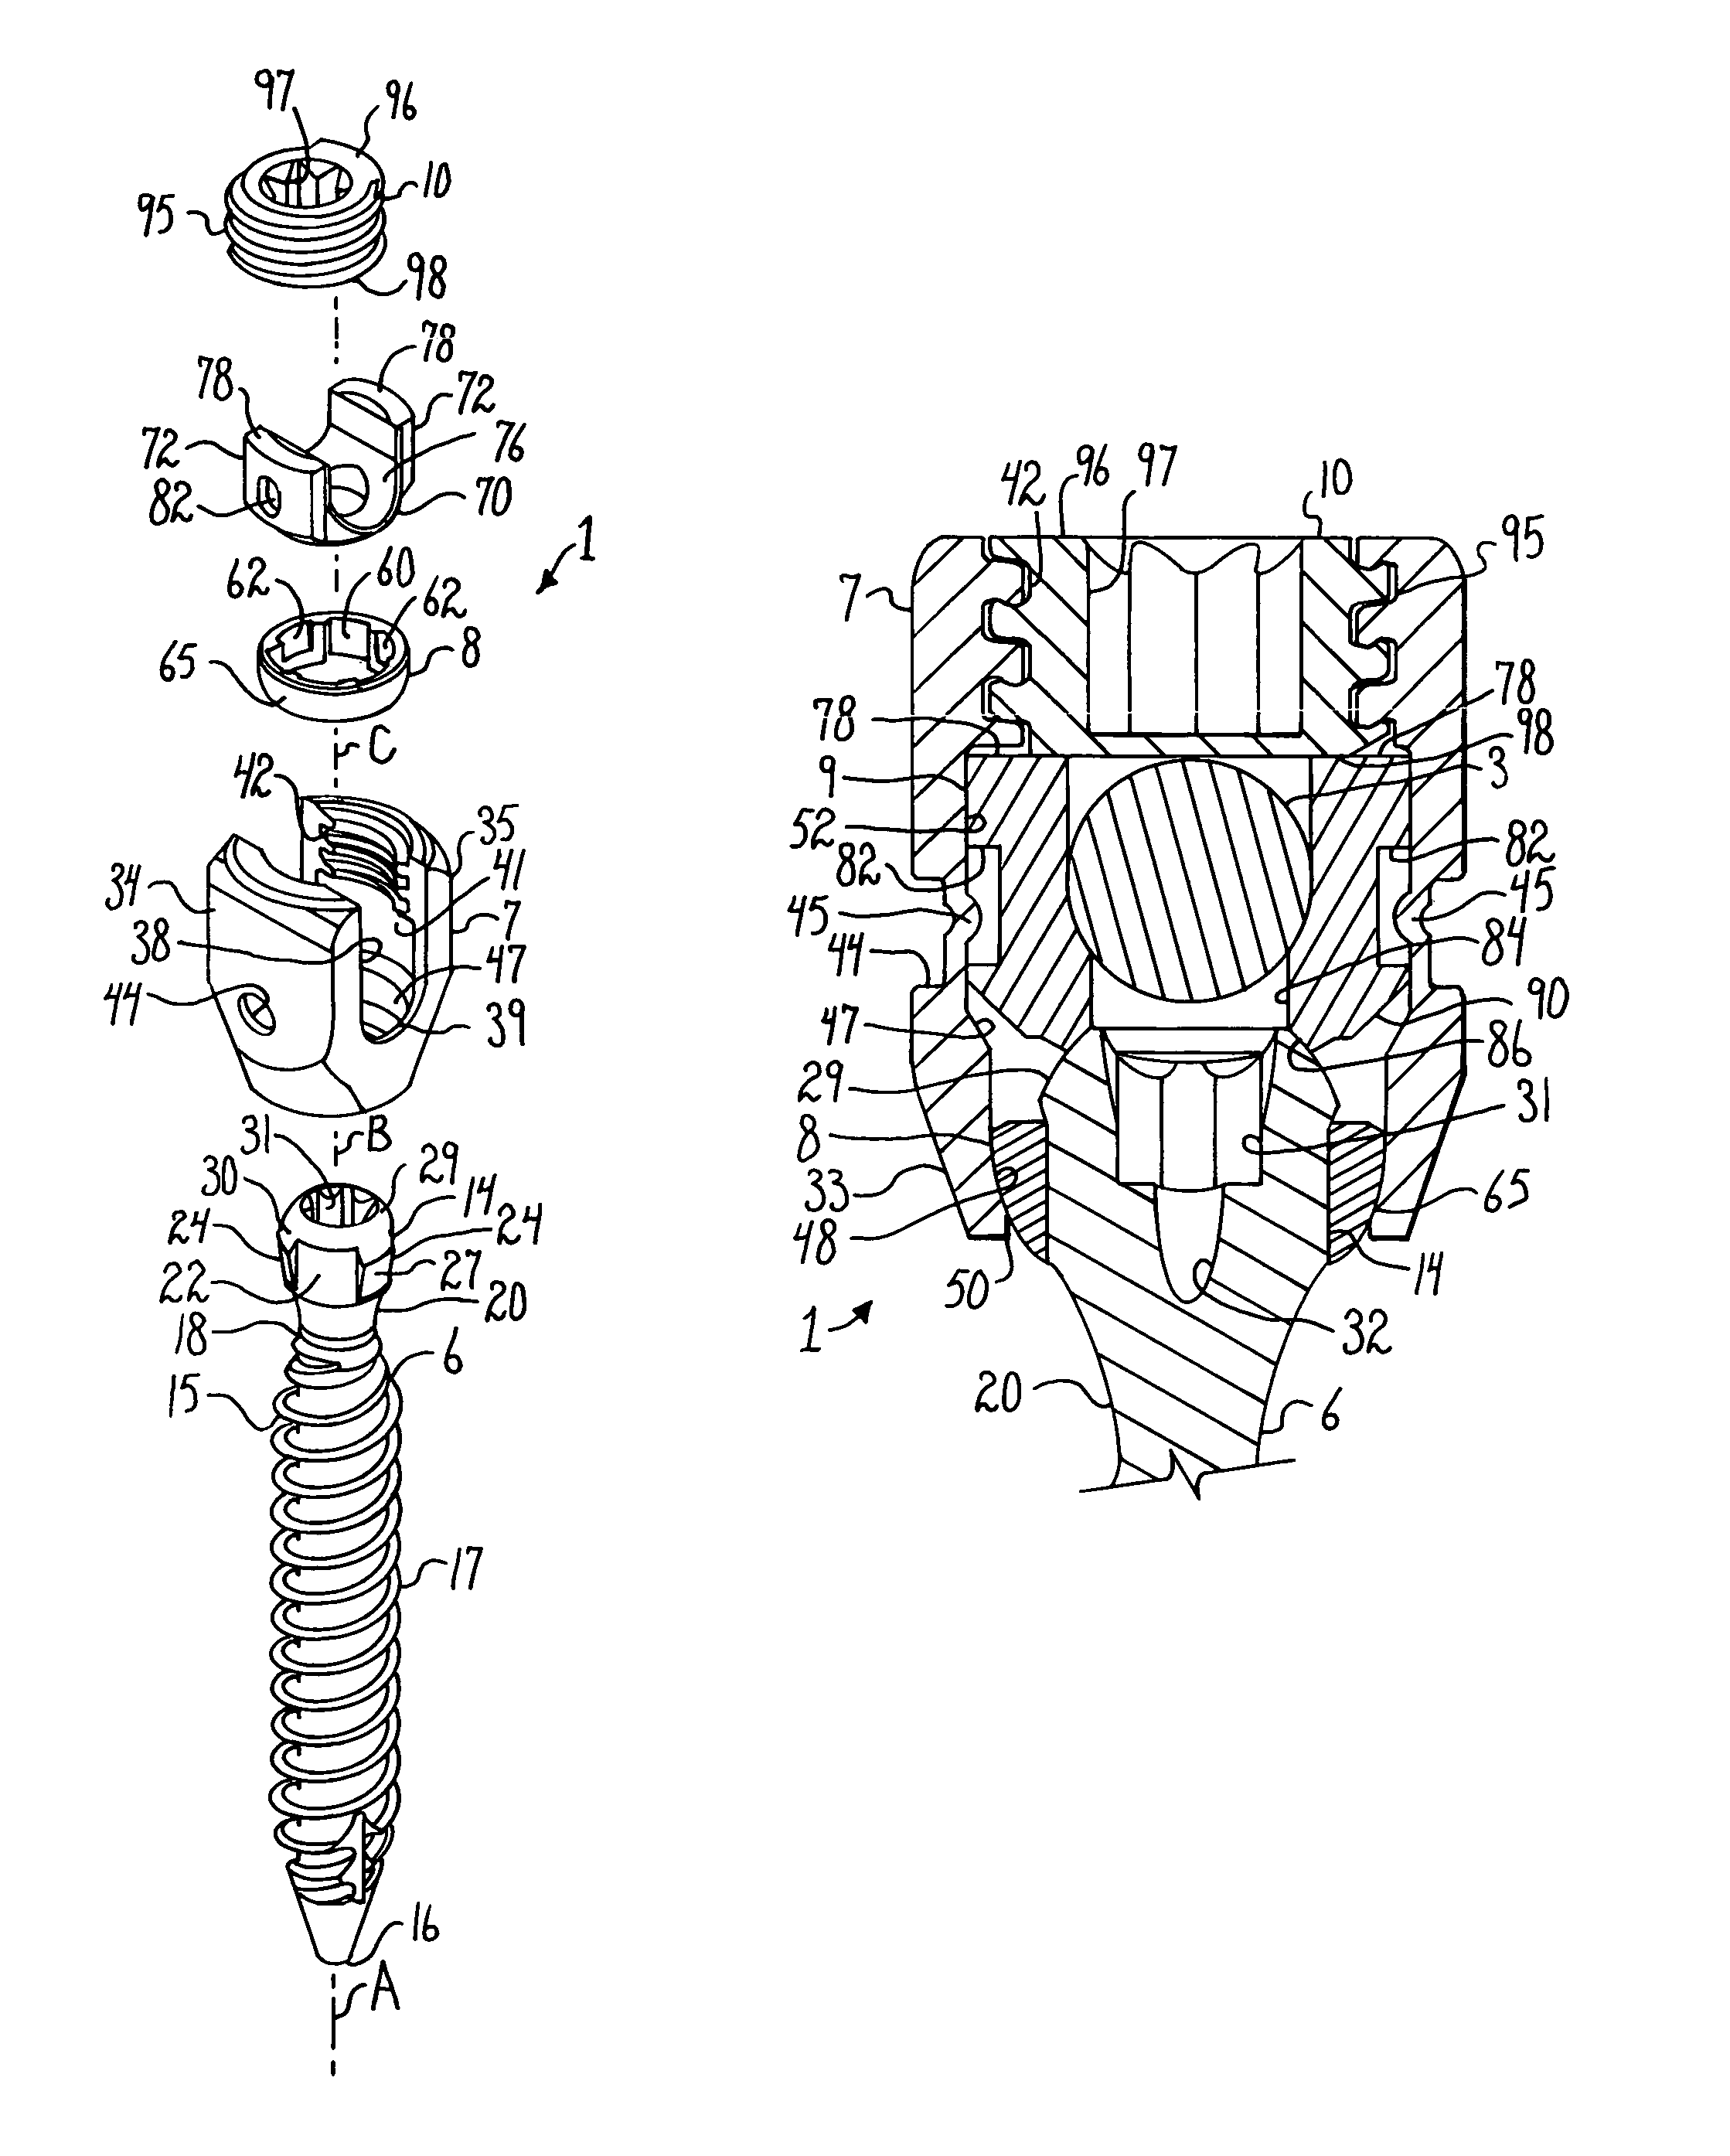 Polyaxial bone anchor with spline capture connection and lower pressure insert